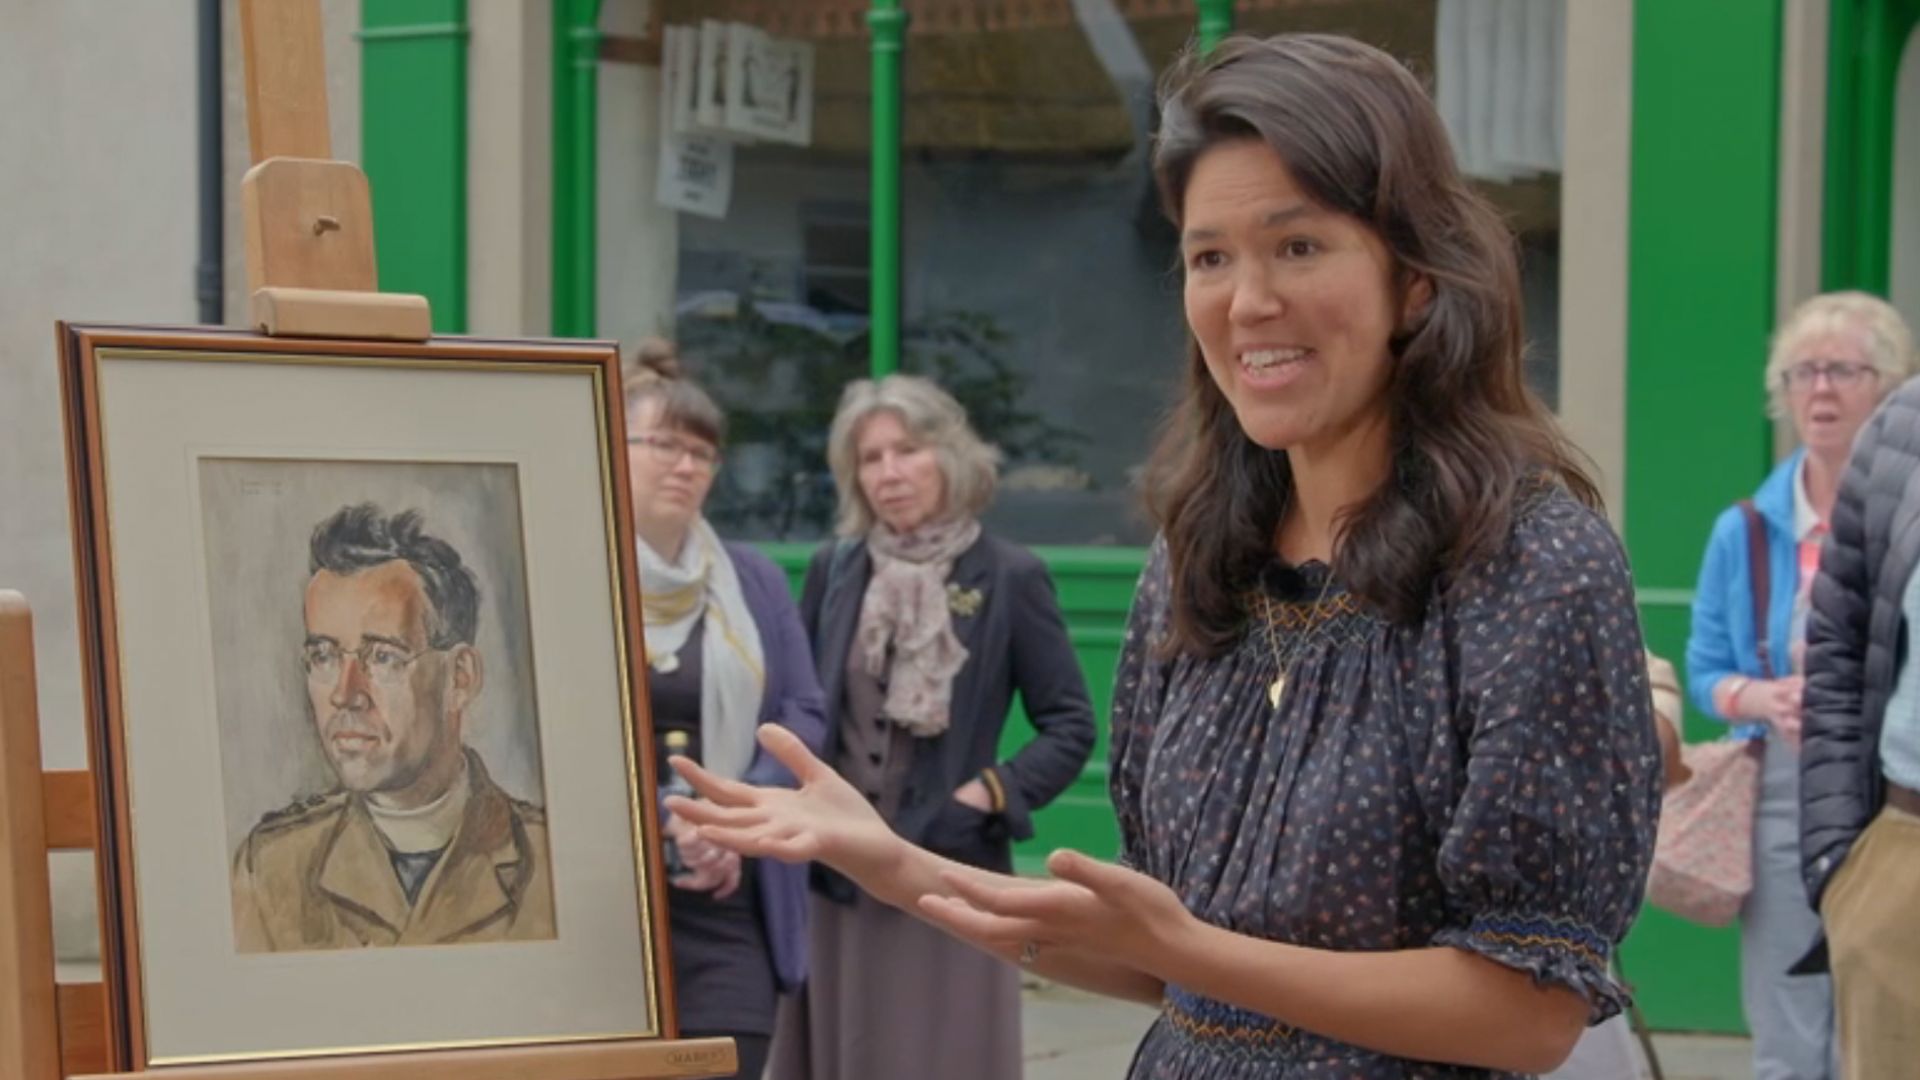 Antiques Roadshow expert refuses to value item after hearing 'incredible' history